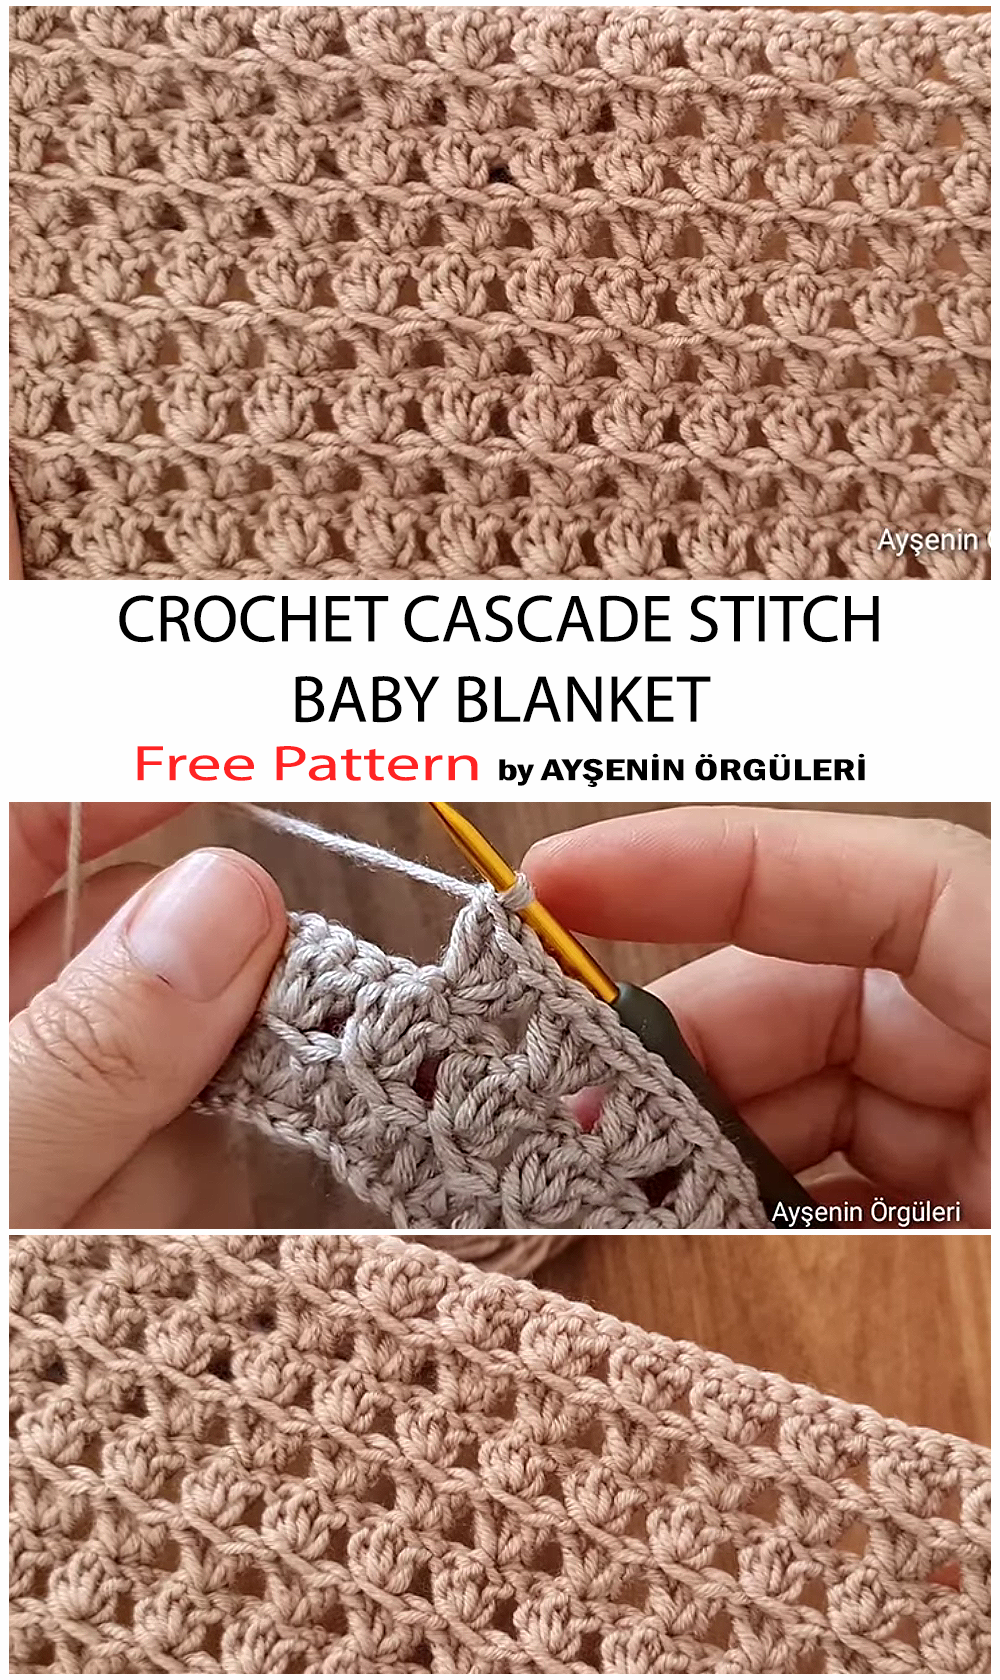 How To Crochet Cascade Stitch Baby Blanket - Free Pattern For Beginners